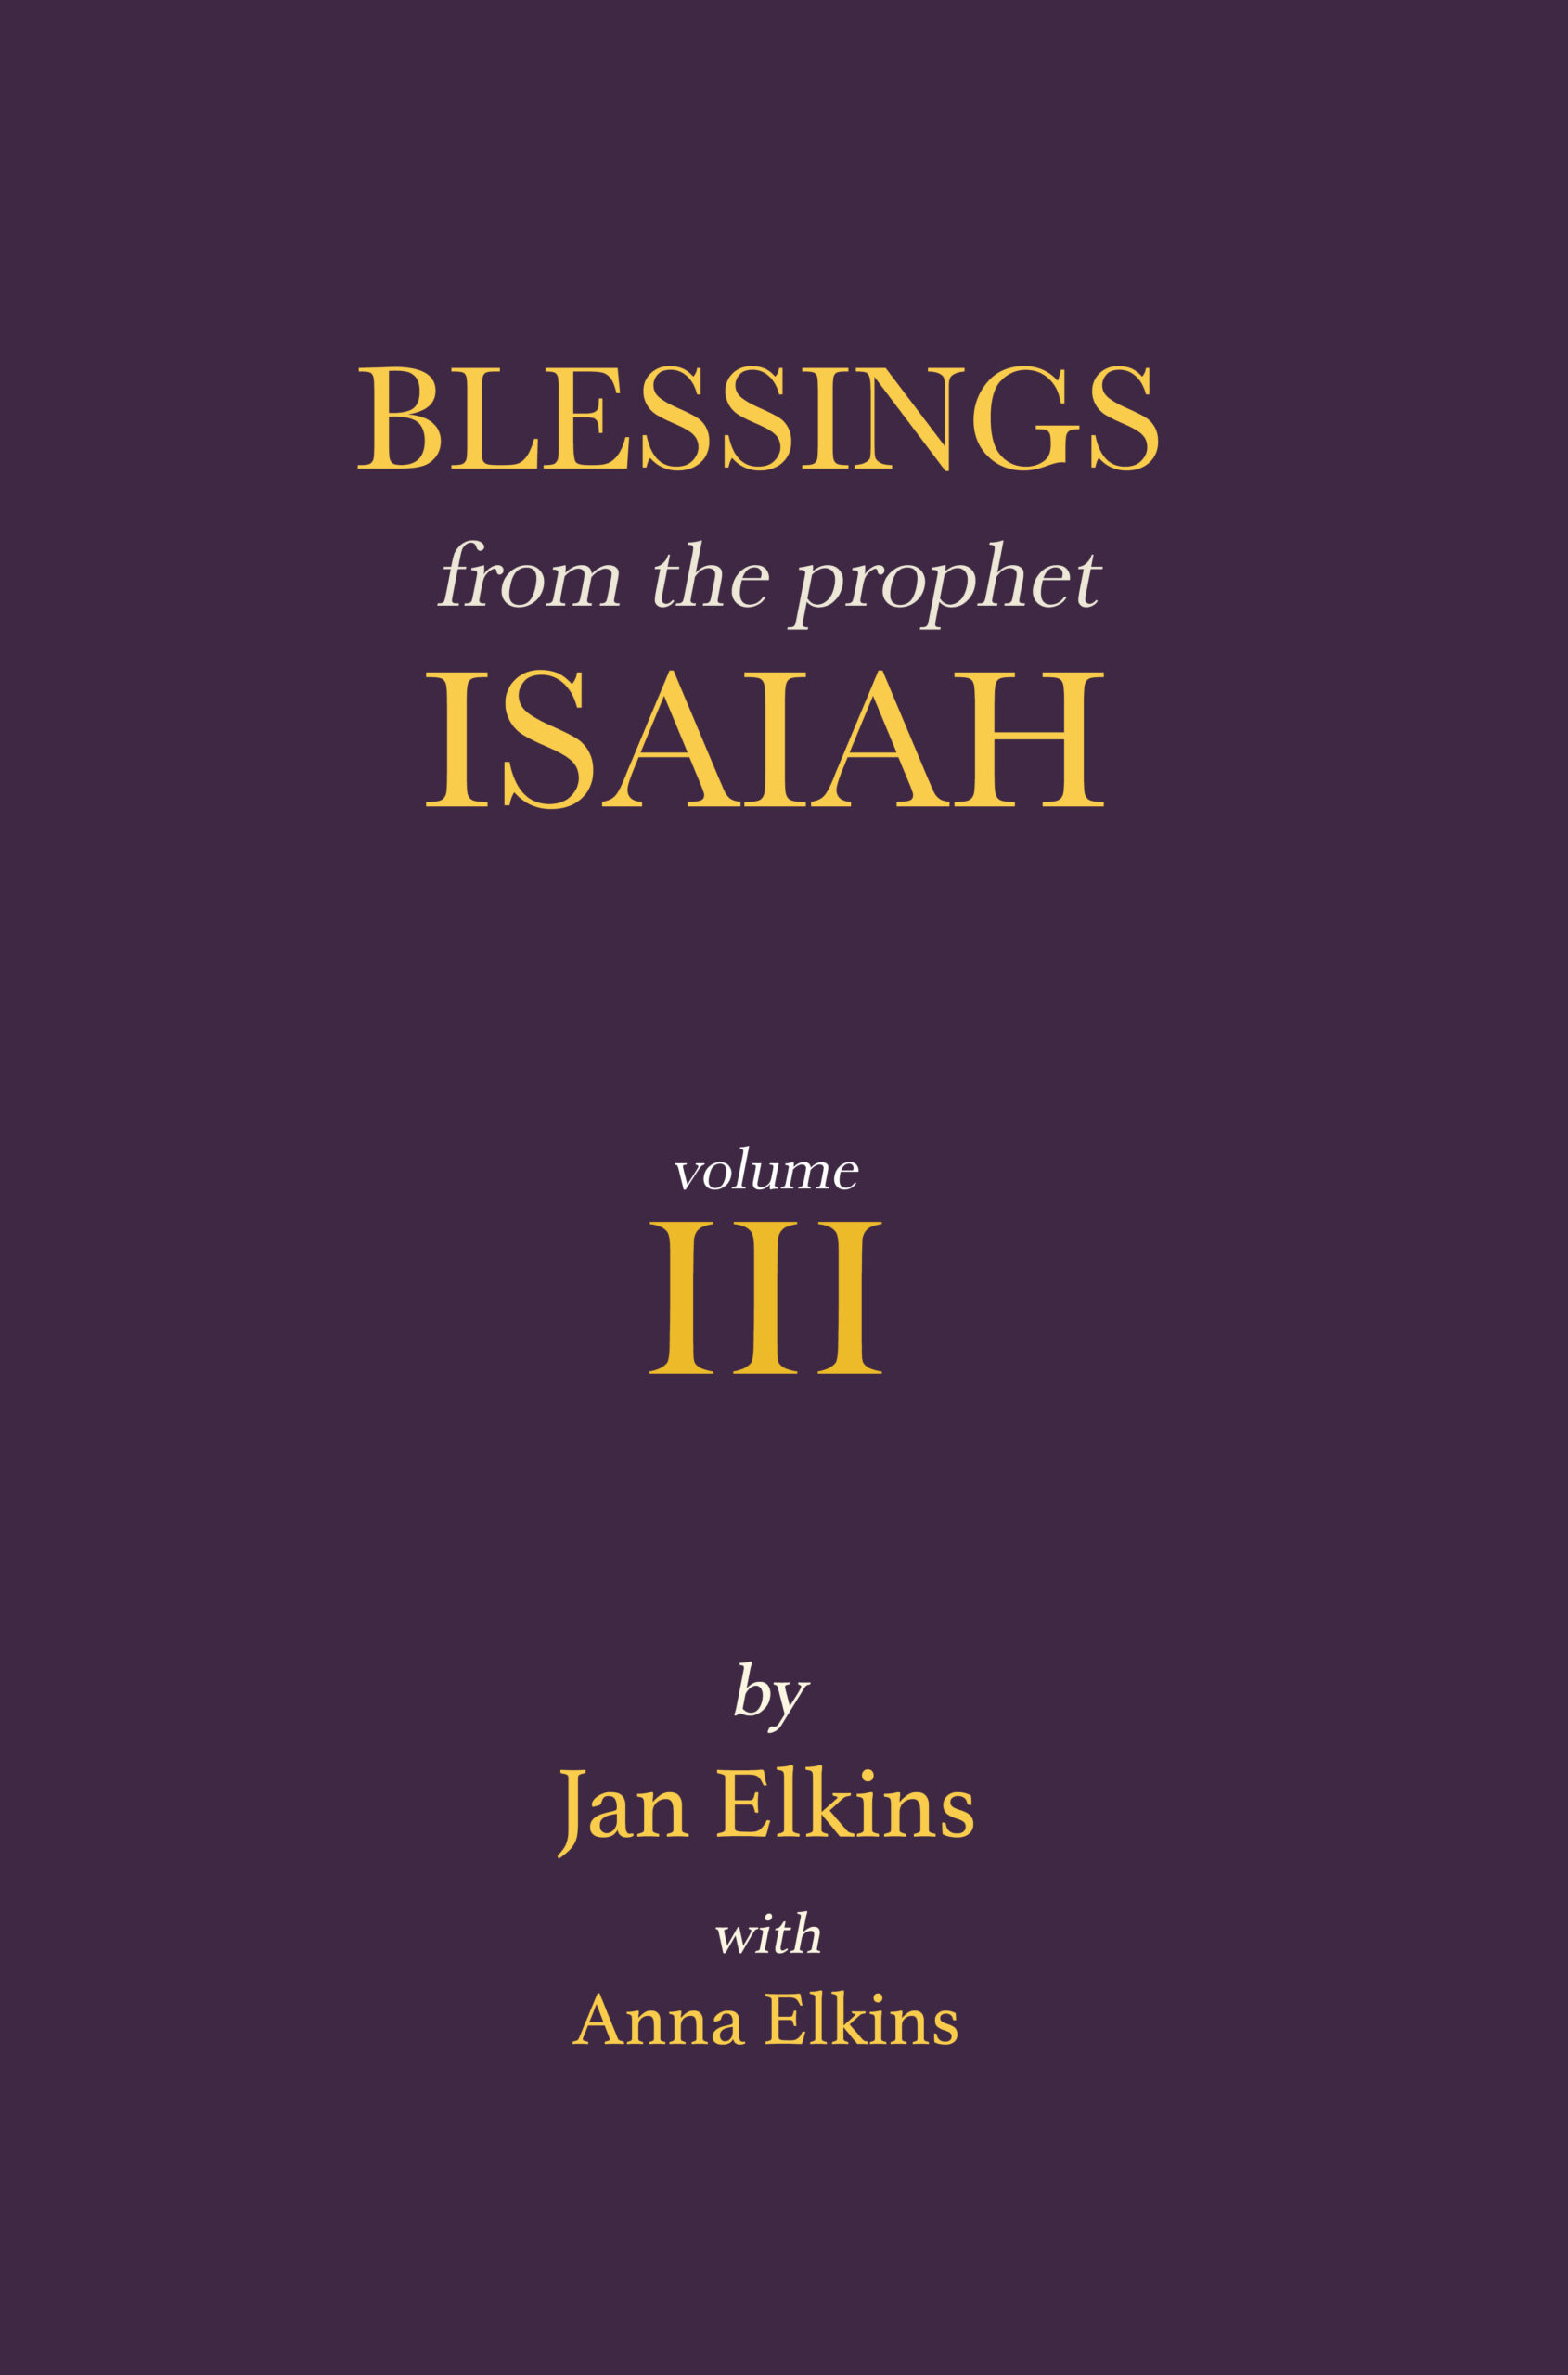 Blessings from the Prophet Isaiah Volume III - by Anna Elkins